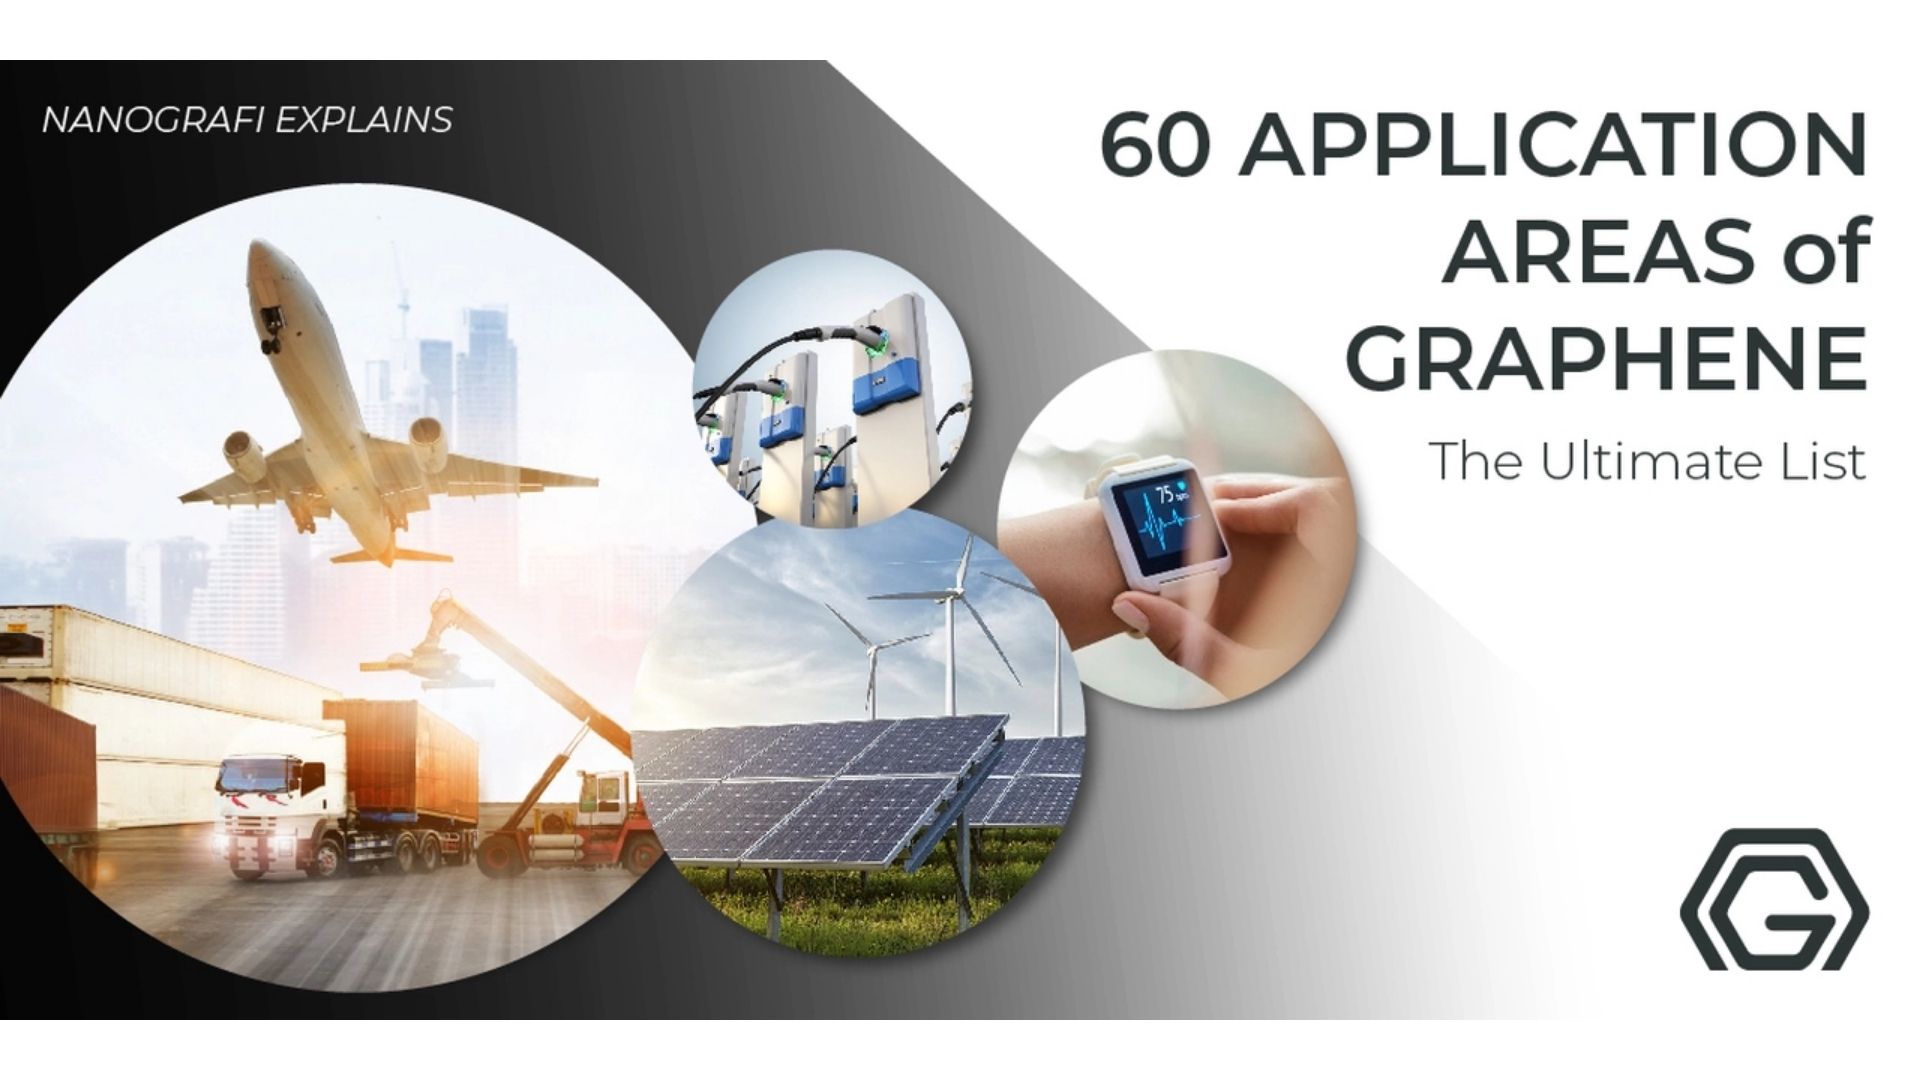 60 Uses and Applications of Graphene